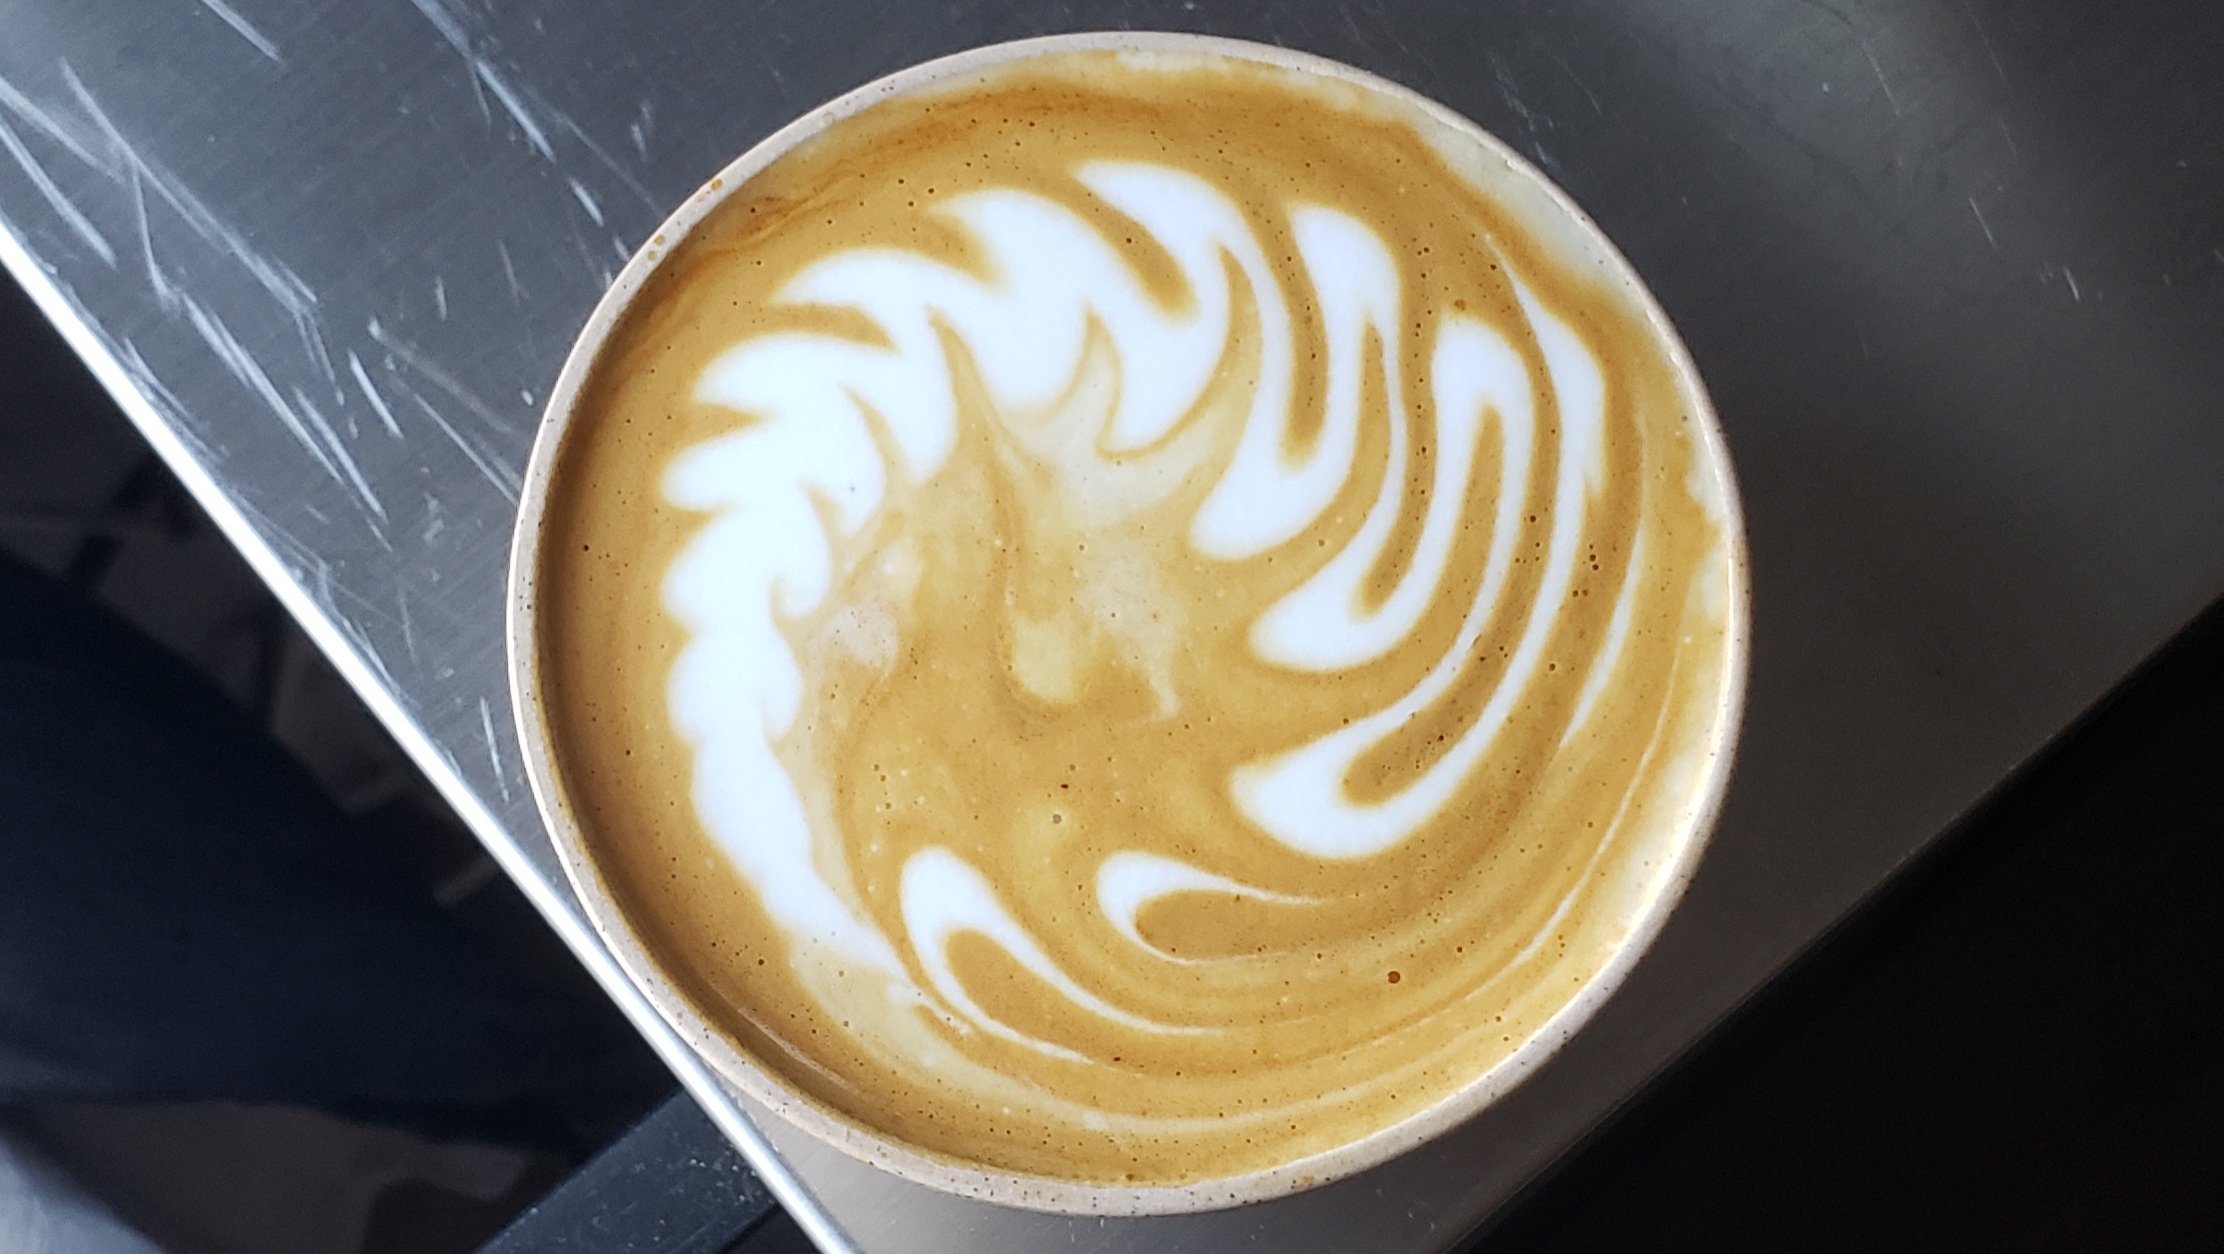 A swirling design of milk foam rests on top of a soft bed of coffee crema. It resembles a whirlpool or as if a fern leaf was twisted into a spiral.